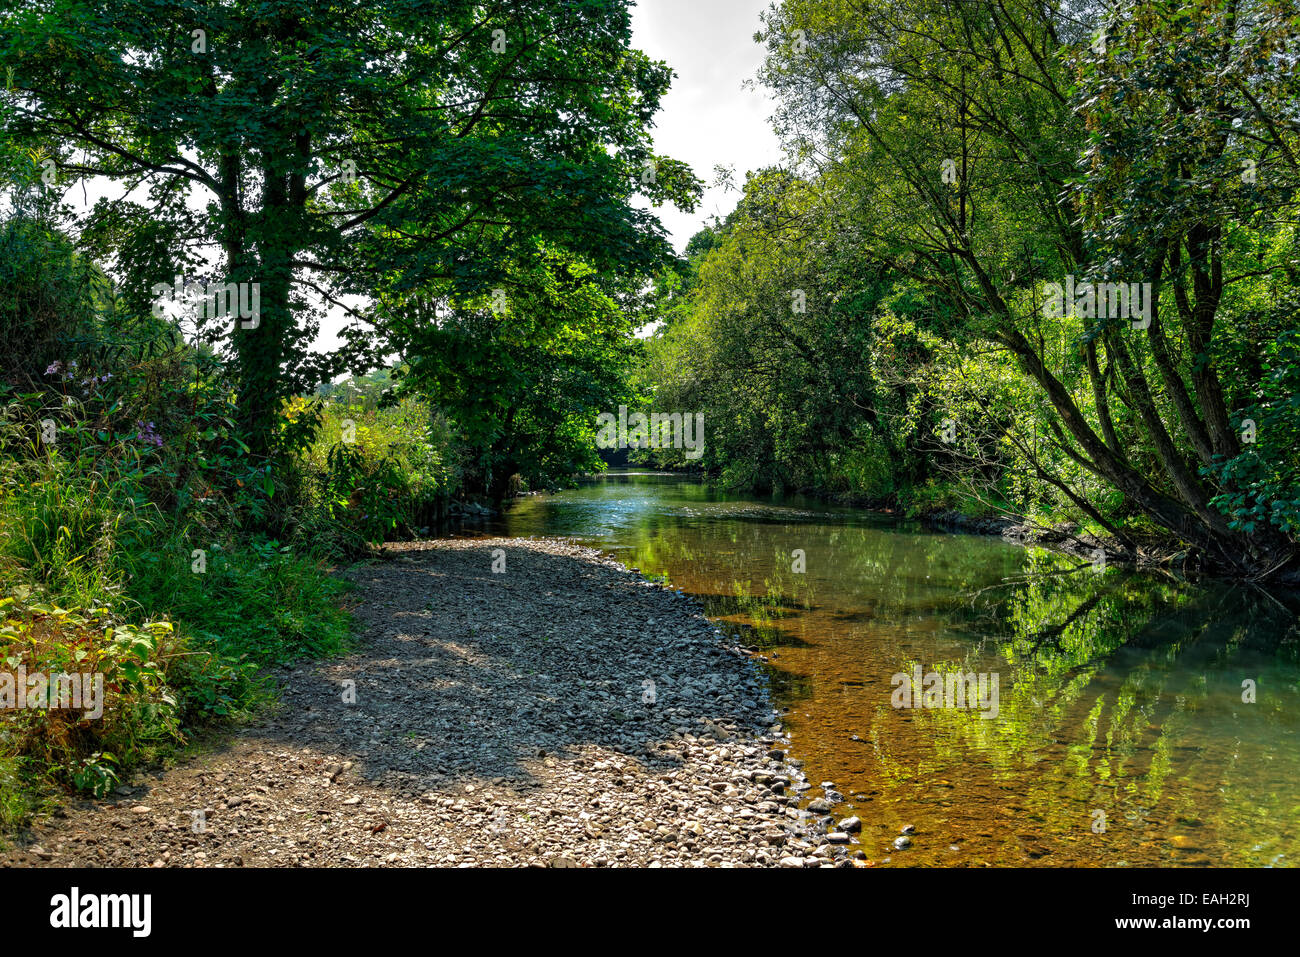 River which is drying up after several months of hot dry weather exposing gravel near the bank. Stock Photo